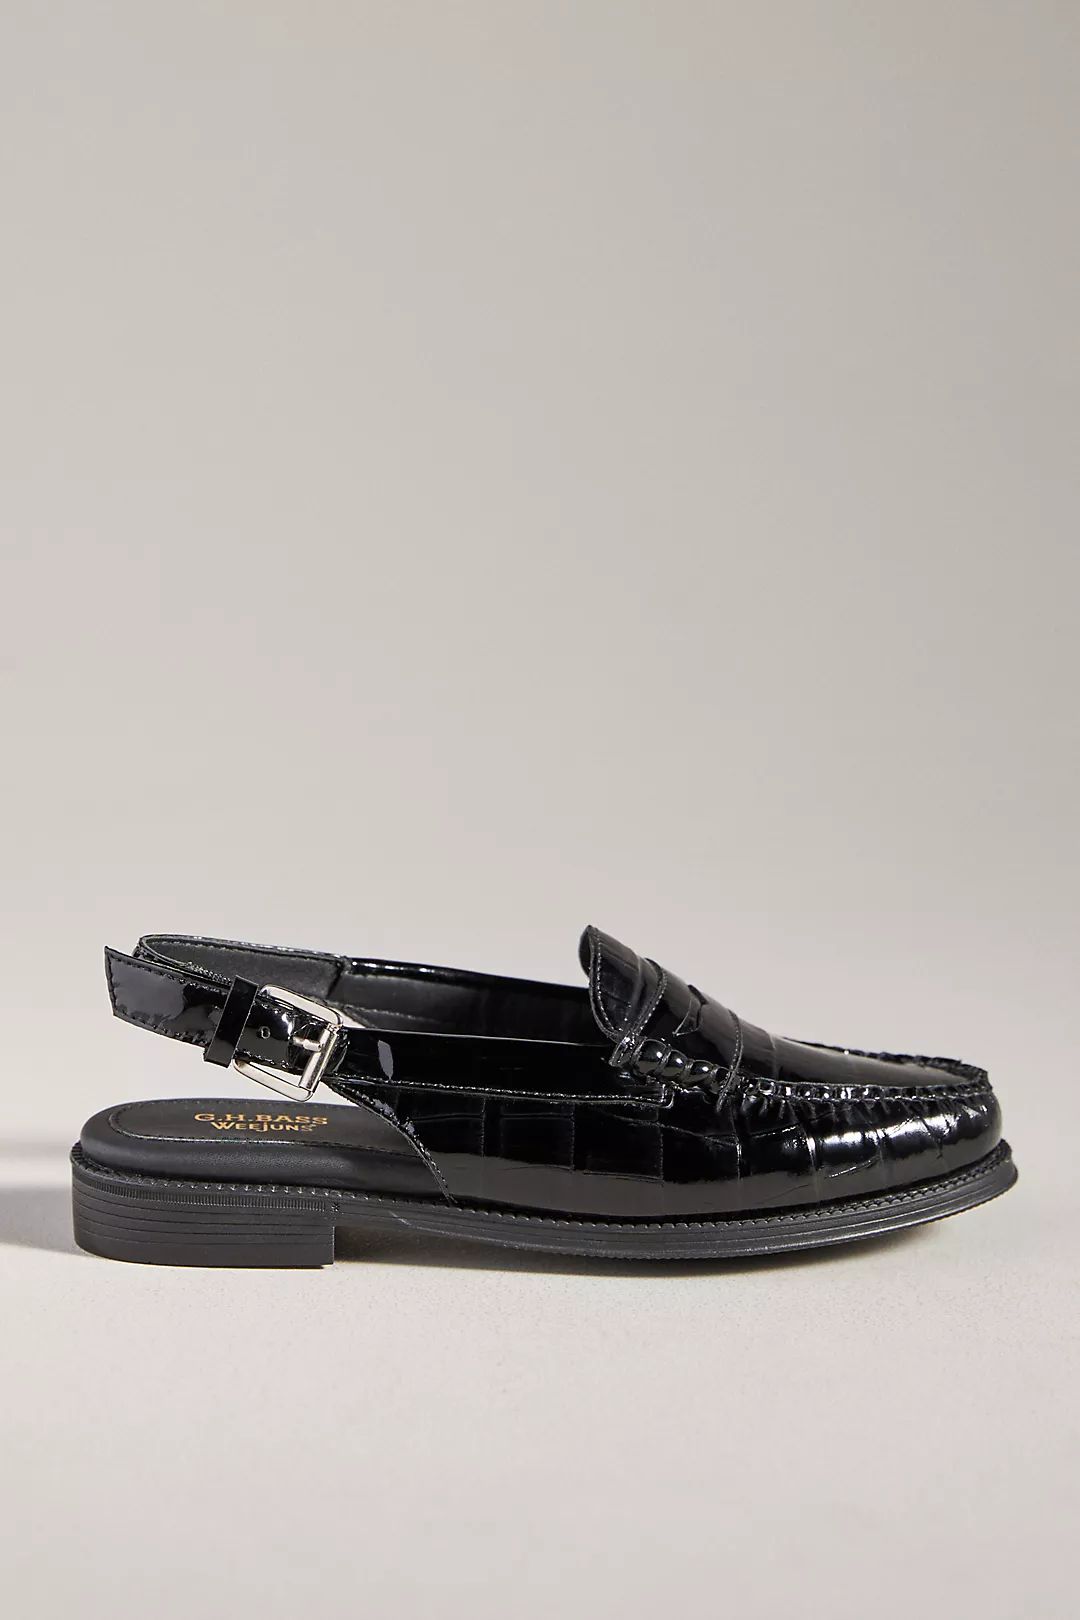 G.H.BASS Weejuns Whitney Slingback Loafers | Anthropologie (US)